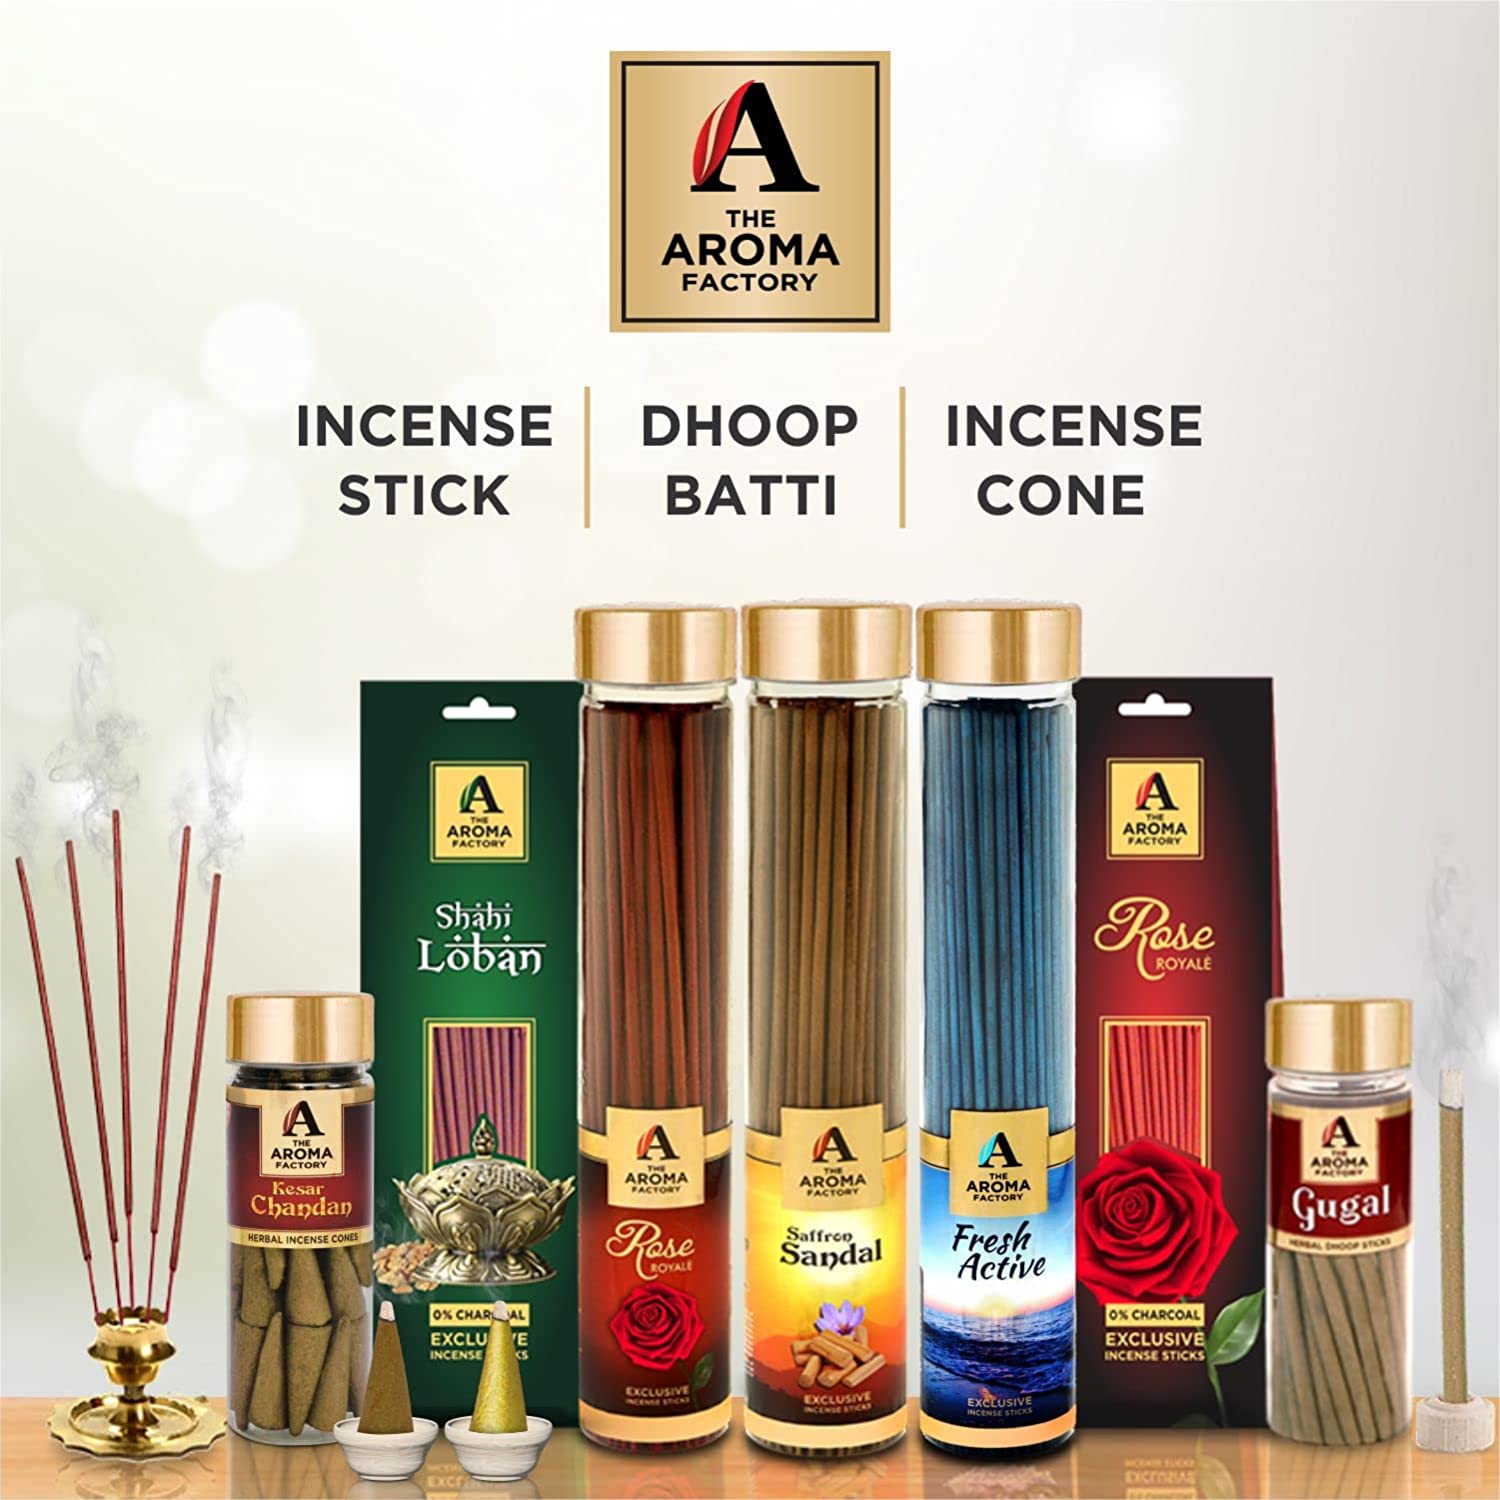 The Aroma Factory Incense Dhoop Cone for Puja, Gugal (100% Herbal & 0% Charcoal) 1 Bottle x 30 Cones